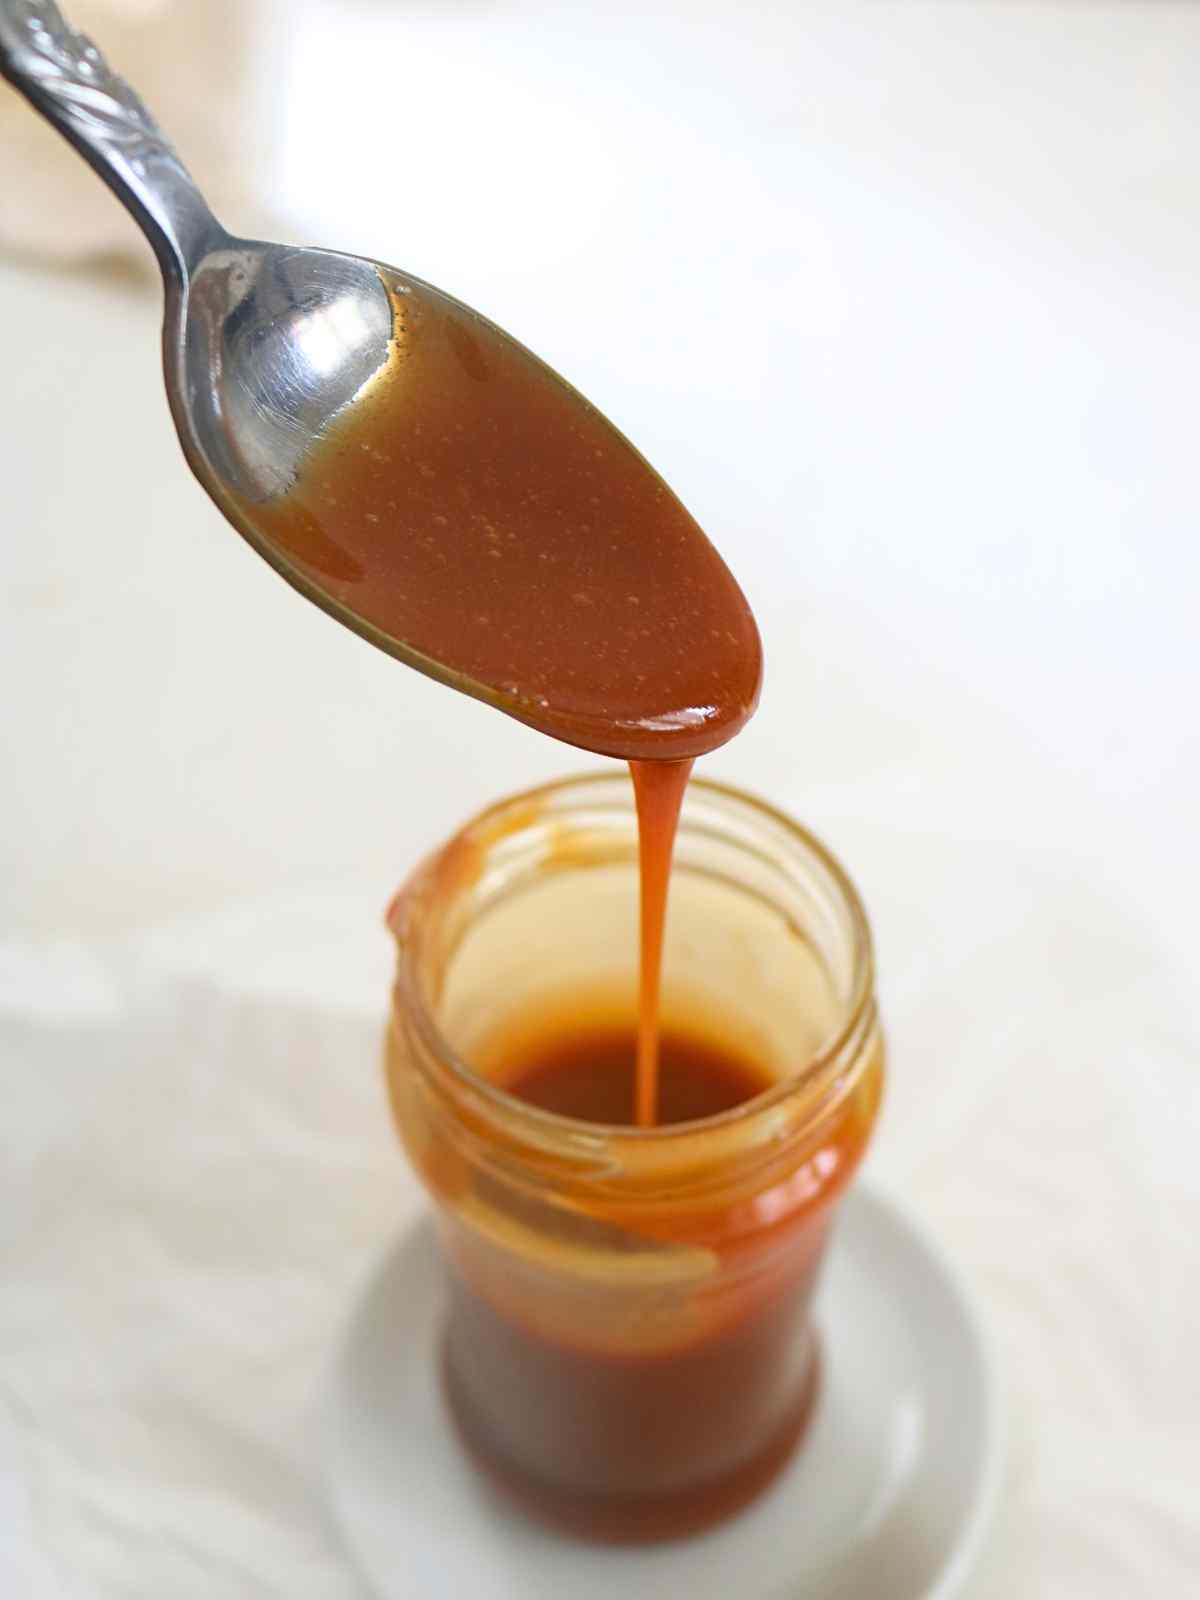 Pouring salted caramel sauce with a spoon in glass jar.